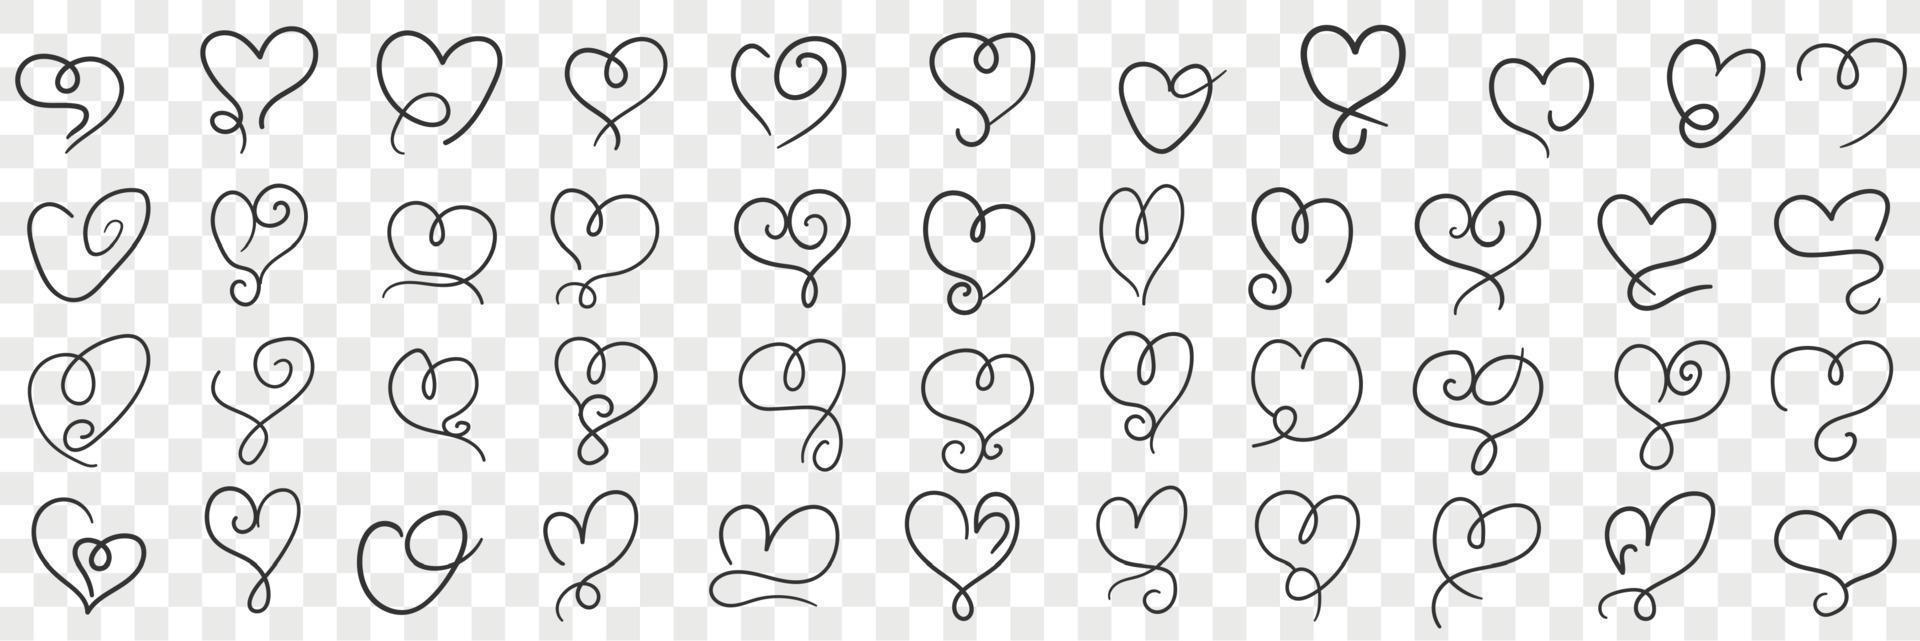 Elegant vintage hearts doodle set. Collection of hand drawn various love symbols hearts with curls lines of different styles and shapes isolated on transparent background vector